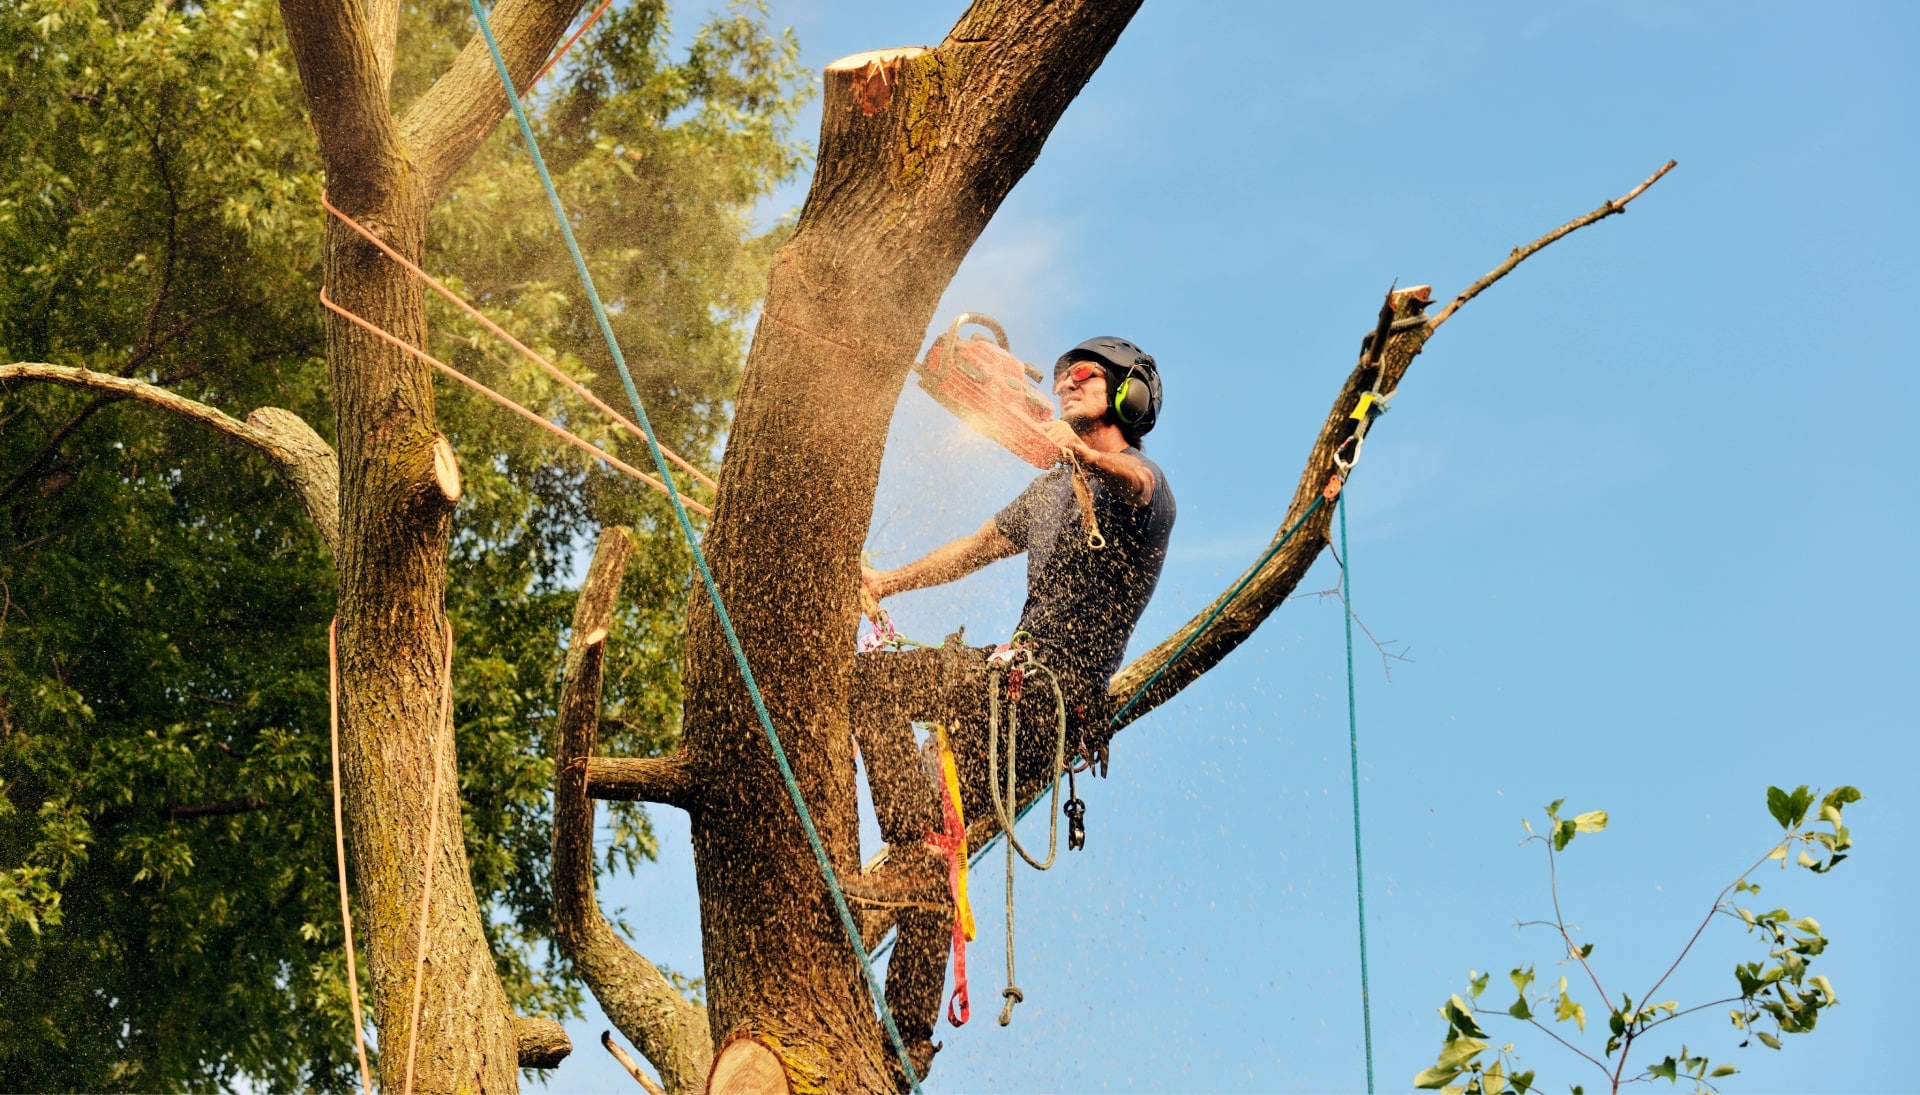 Plano tree removal experts solve tree issues.